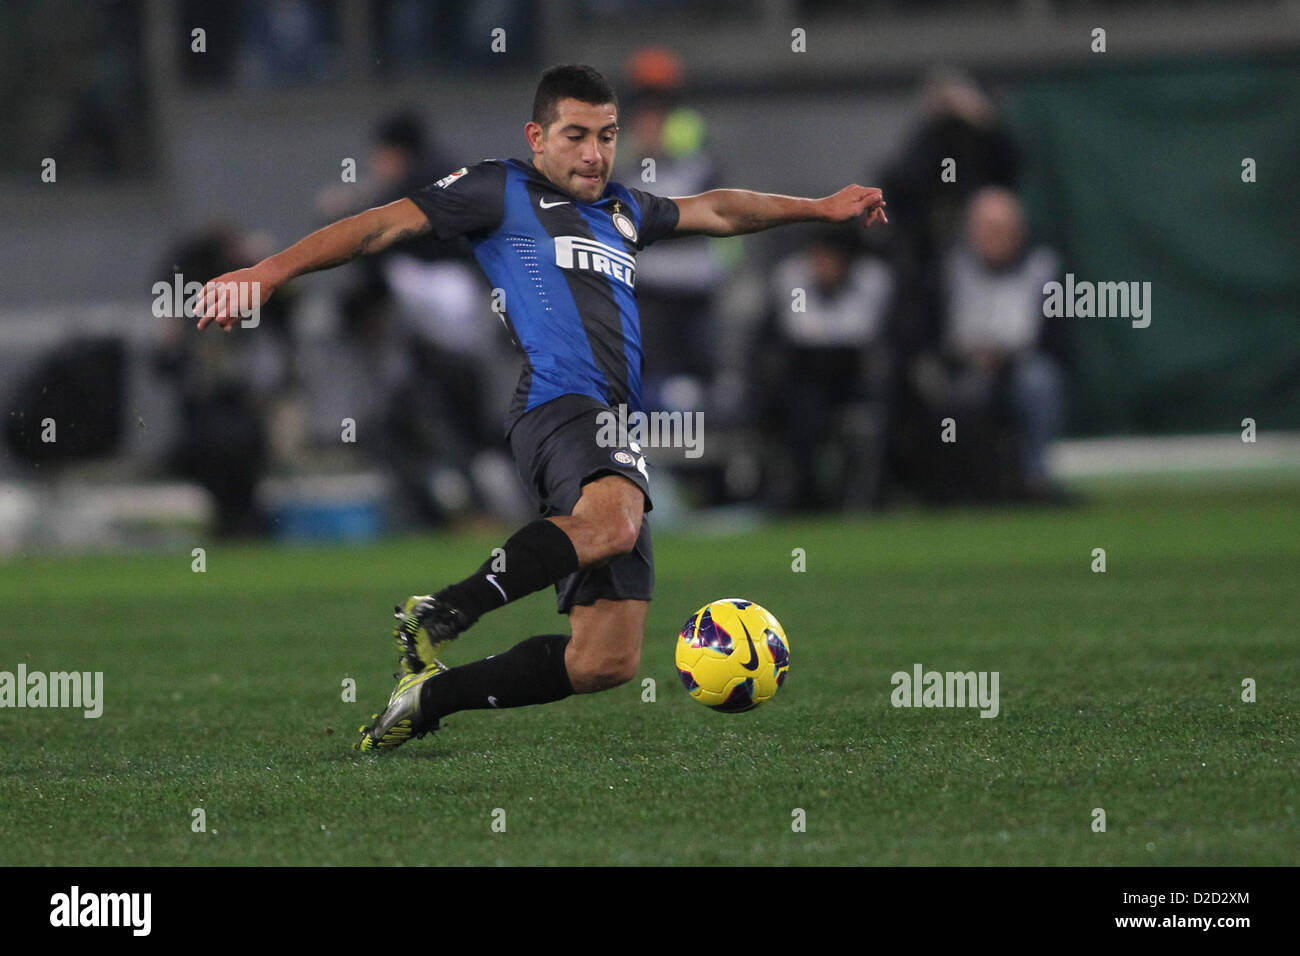 20.01.2013 Rome, Italy. Walter Gargano in action during the Serie A game between Roma and Inter Milan from the Stadio Olympico. Stock Photo